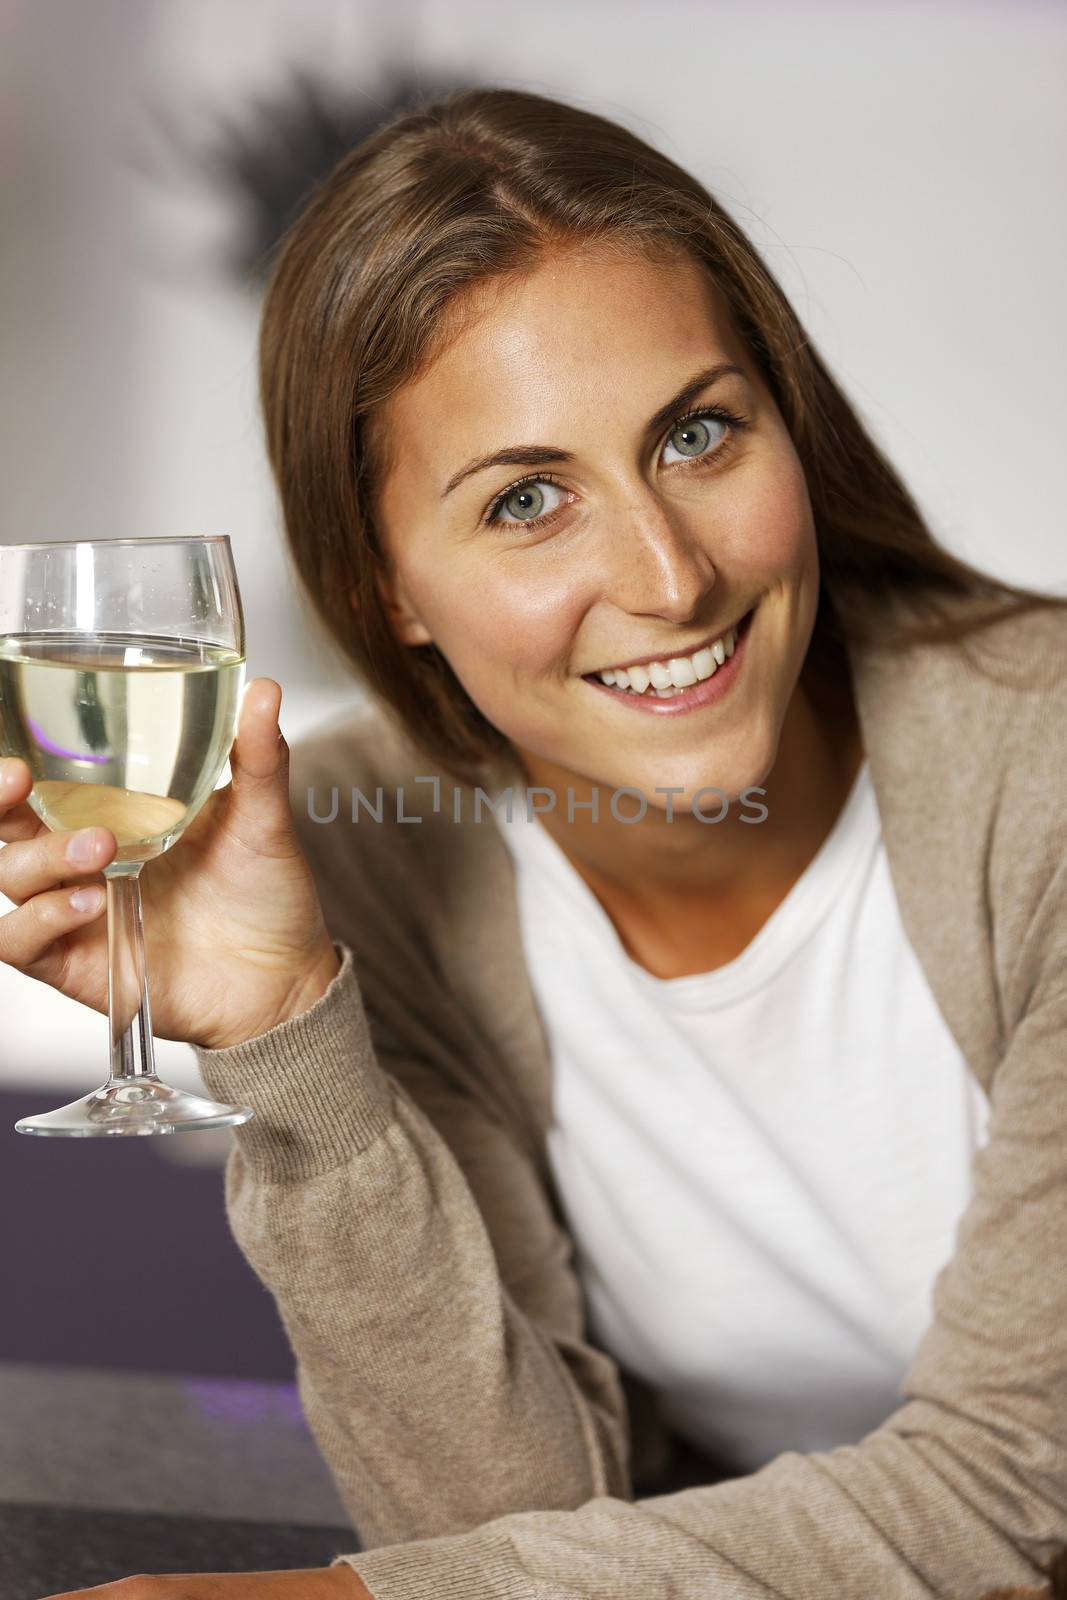 Attractive young woman enjoying a glass of wine in her kitchen.